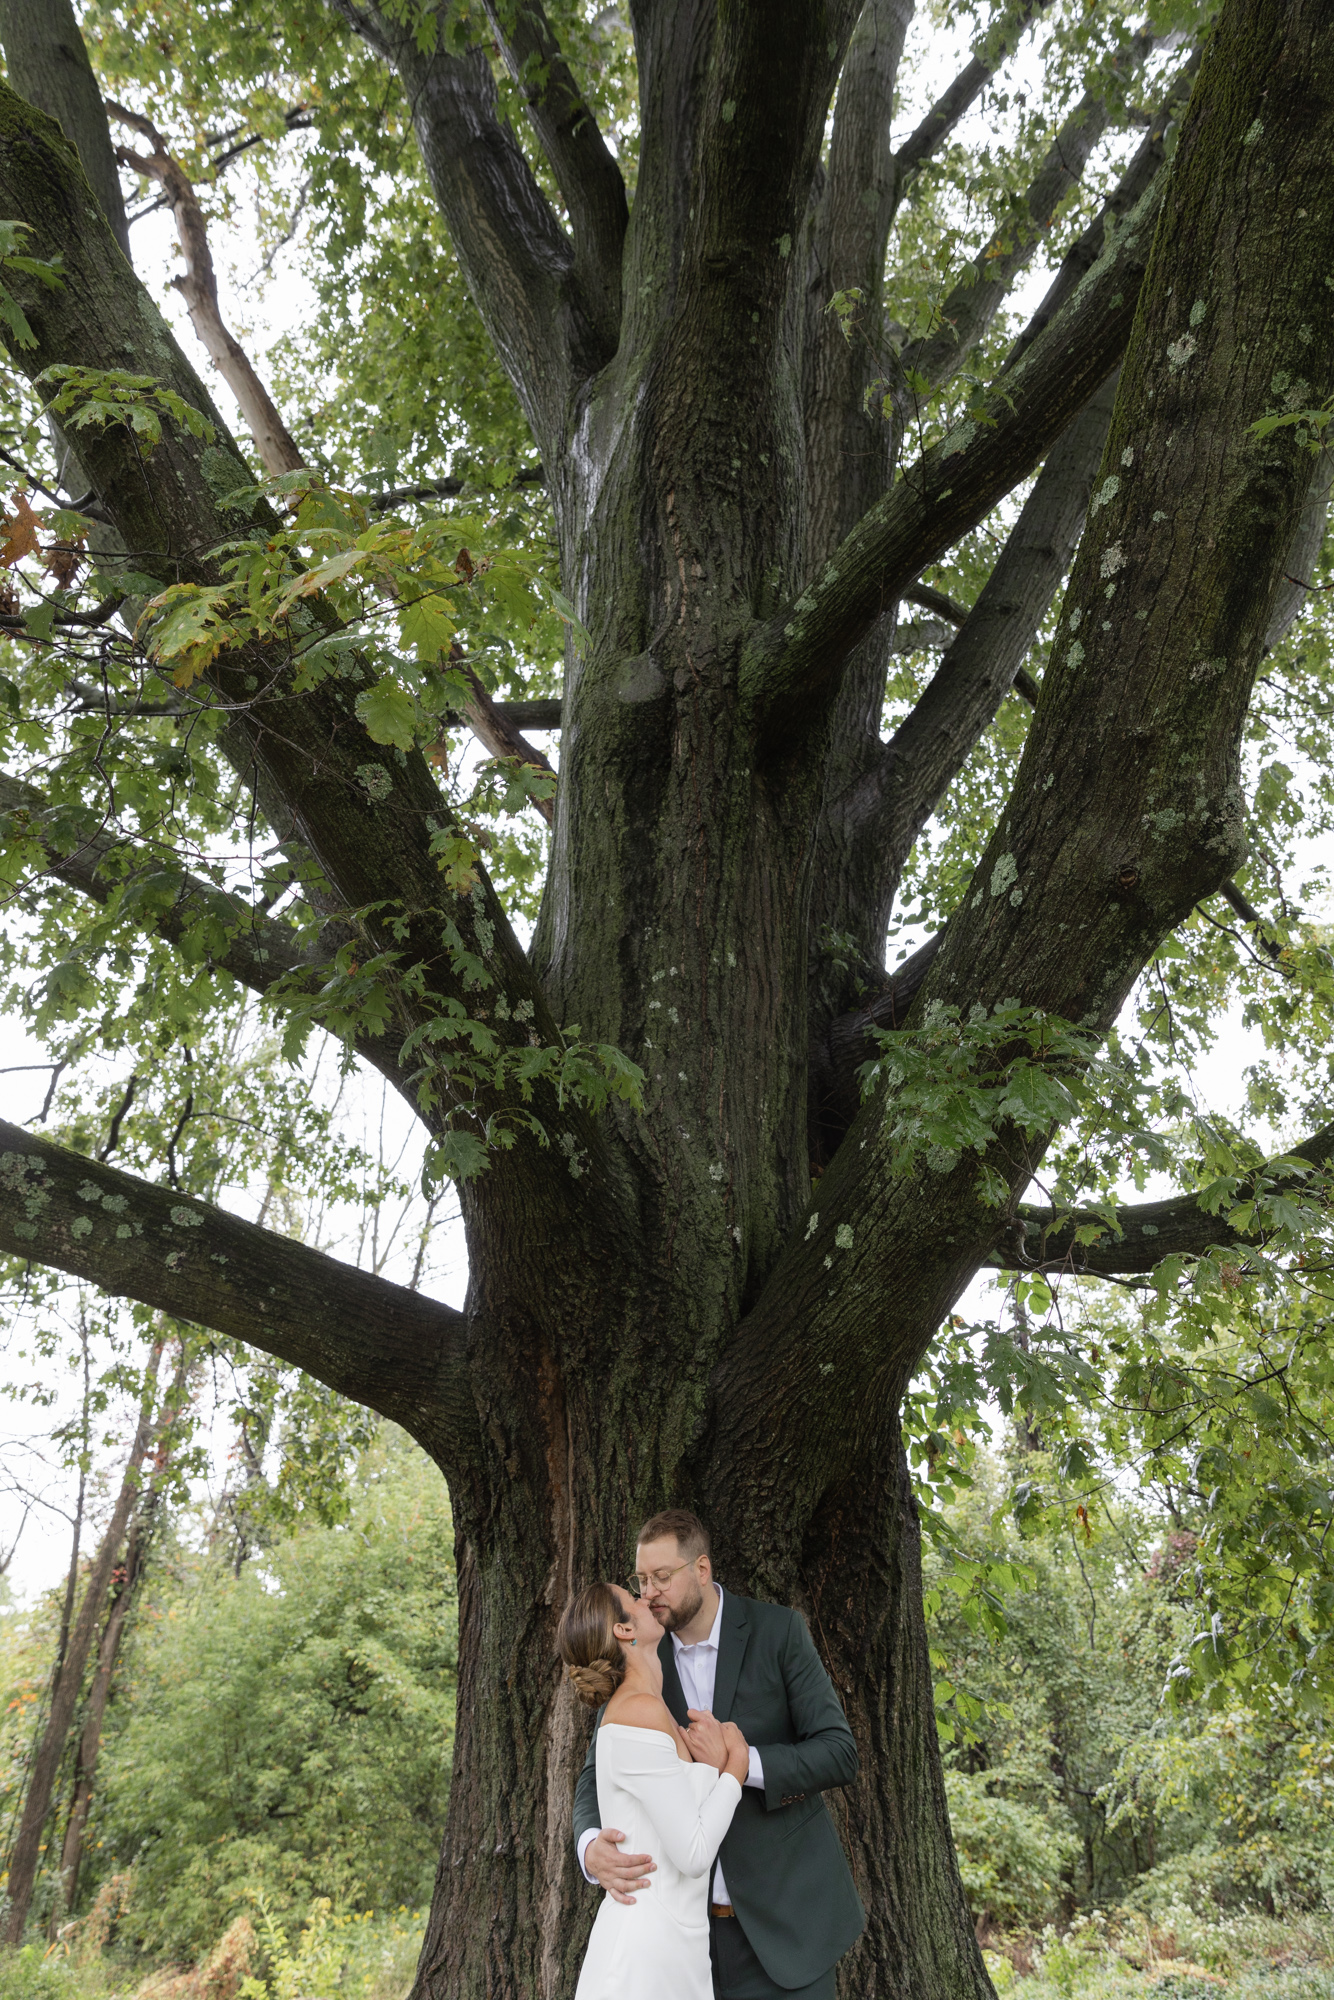 an elegant bride and groom kiss under a towering tree after their wedding ceremony at Chimney Hill Estate Inn in Lambertville, NJ